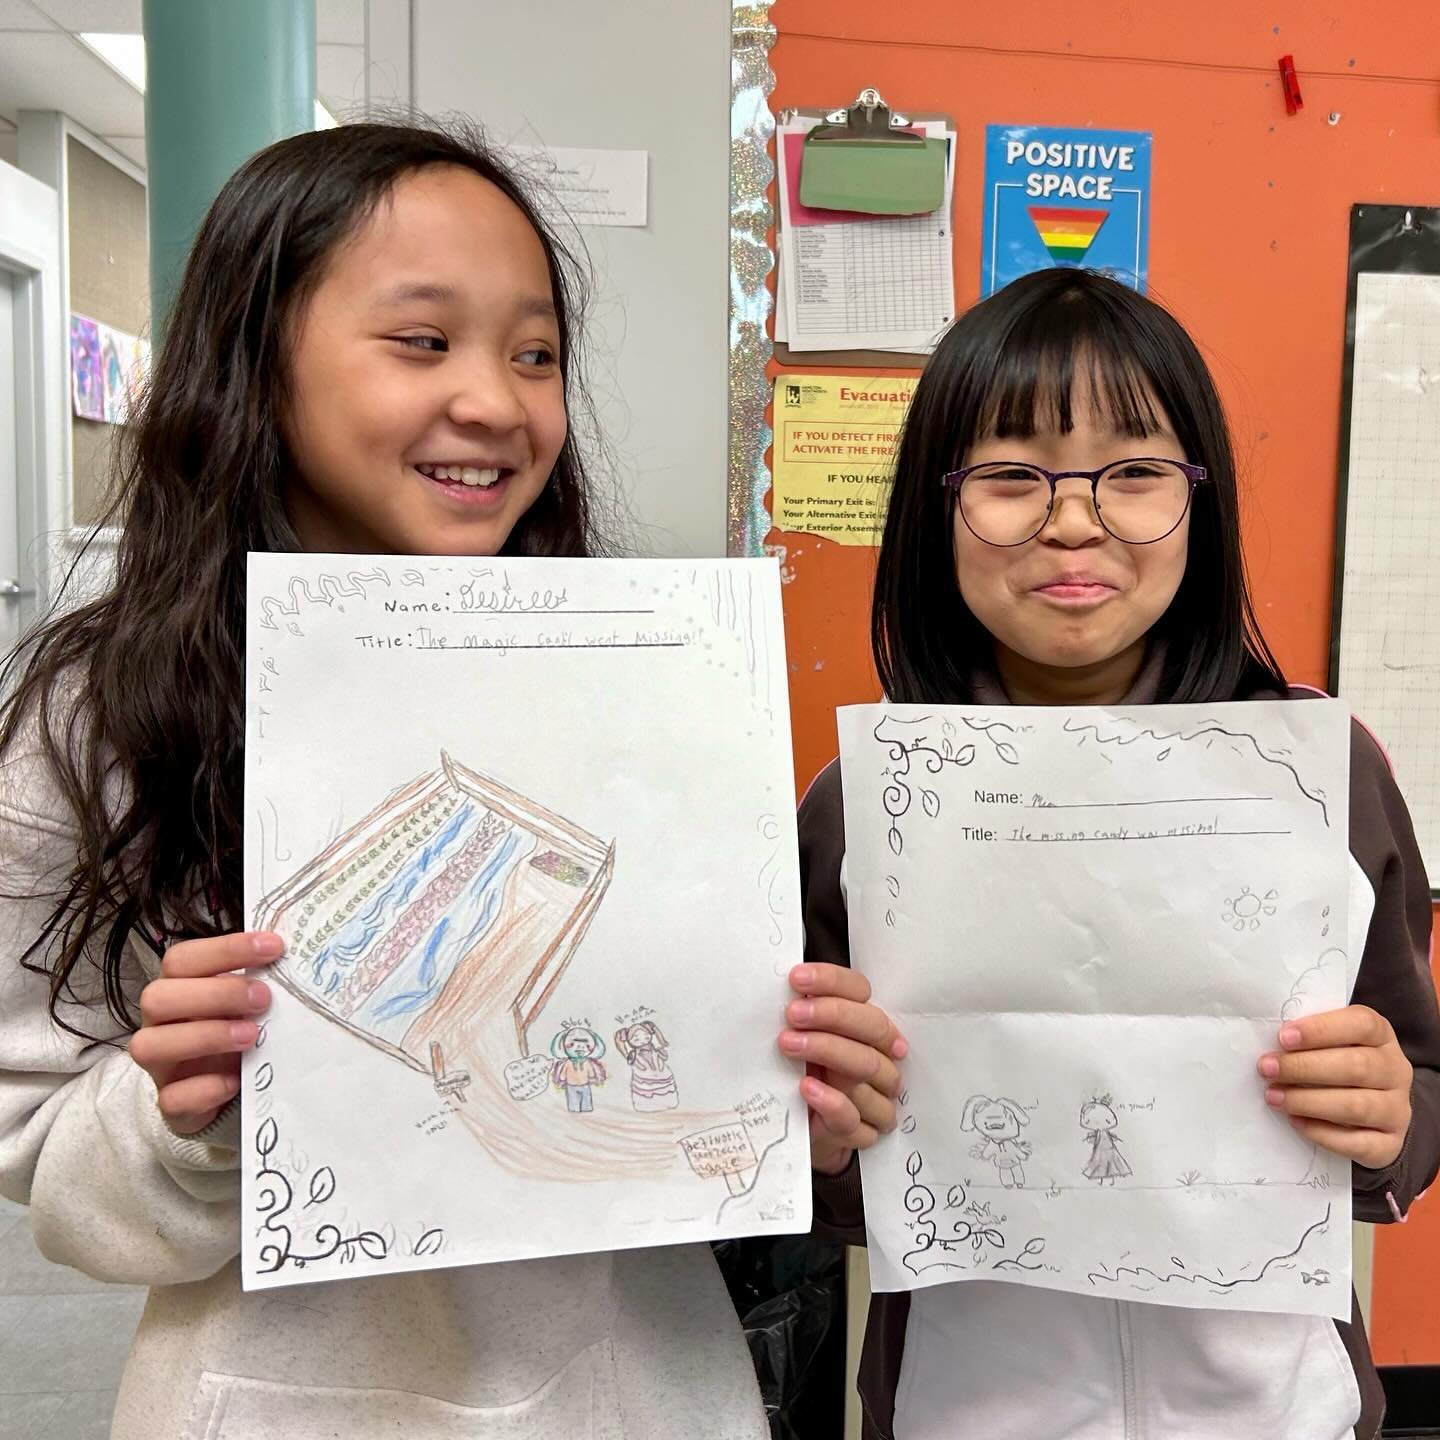 At Hess Street Elementary in Hamilton, creativity overflowed! 🌟

Meet BBCQ, the shapeshifting star of &ldquo;The Magic Candy Went Missing&rdquo; 🍬 💫 (in human form, he&rsquo;s bald and wears too much perfume)

After writing and illustrating their 